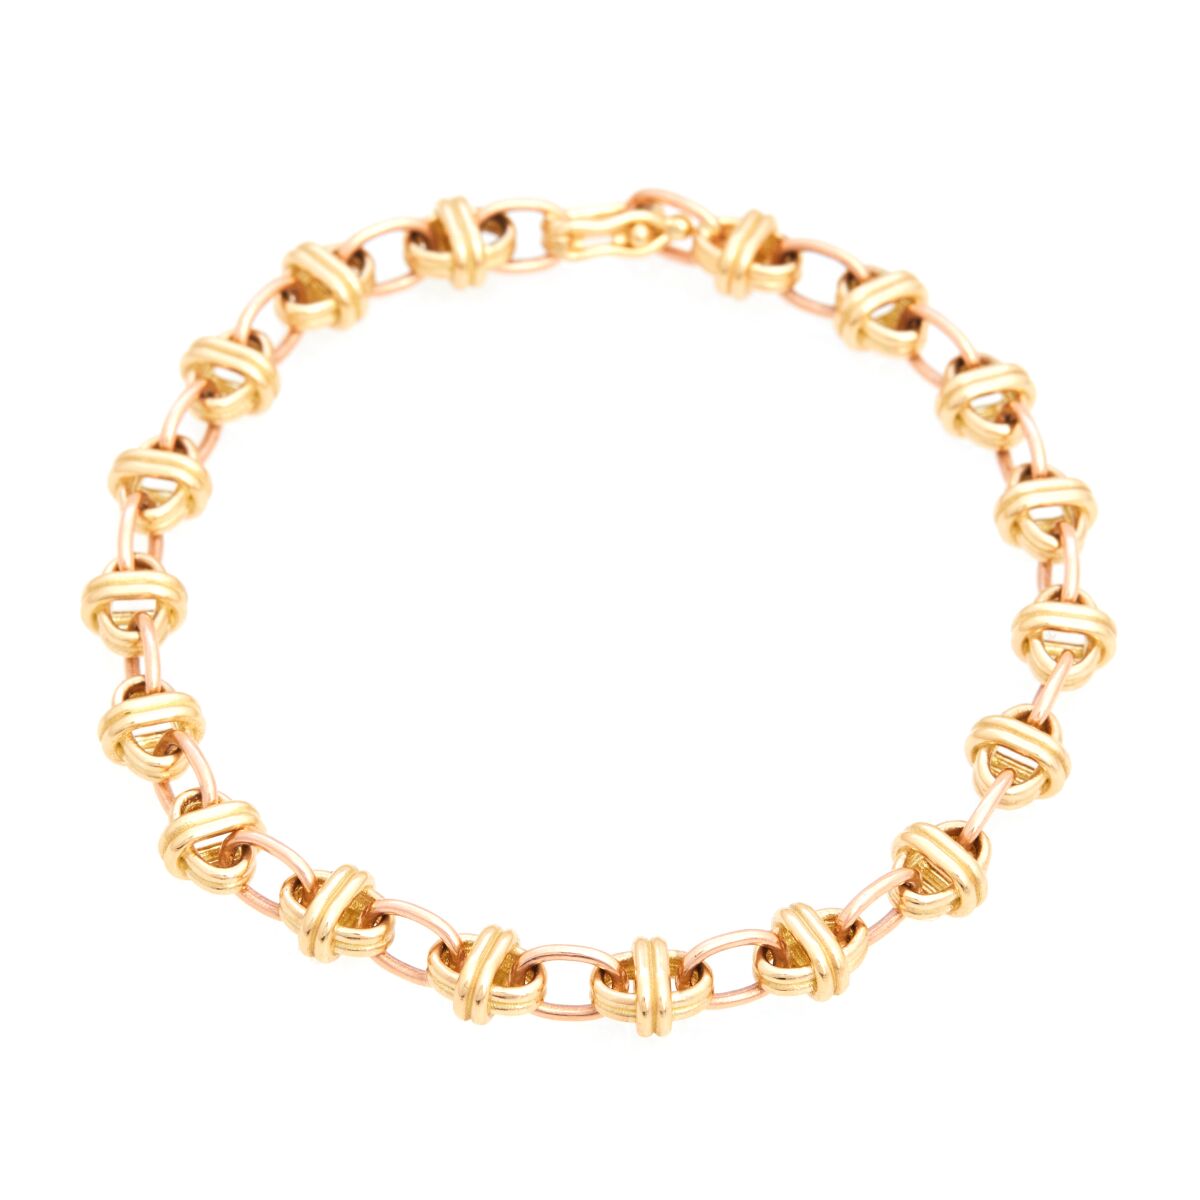 Retro-inspired oval chain bracelet in yello and rose gold